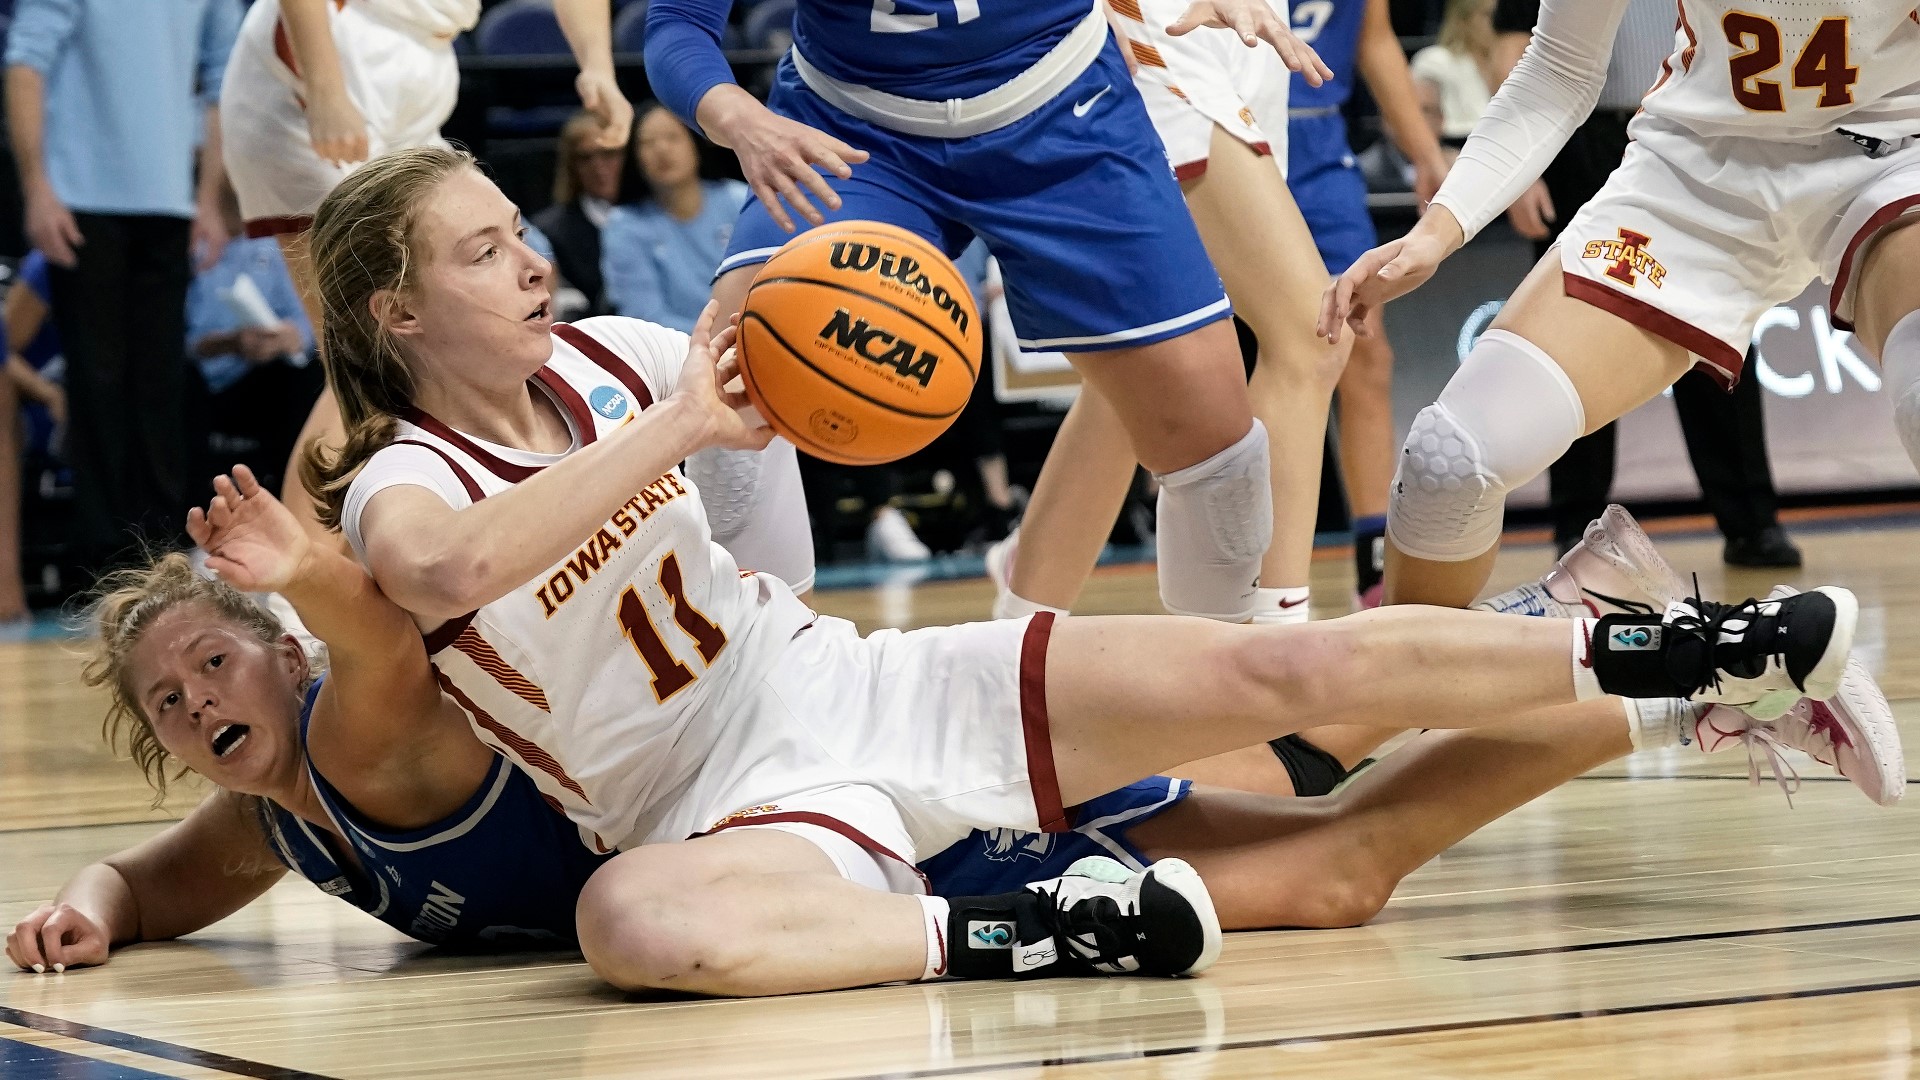 Emily Ryan scored 22 for the Cyclones, while Tatum Rembao had 19 for Creighton.